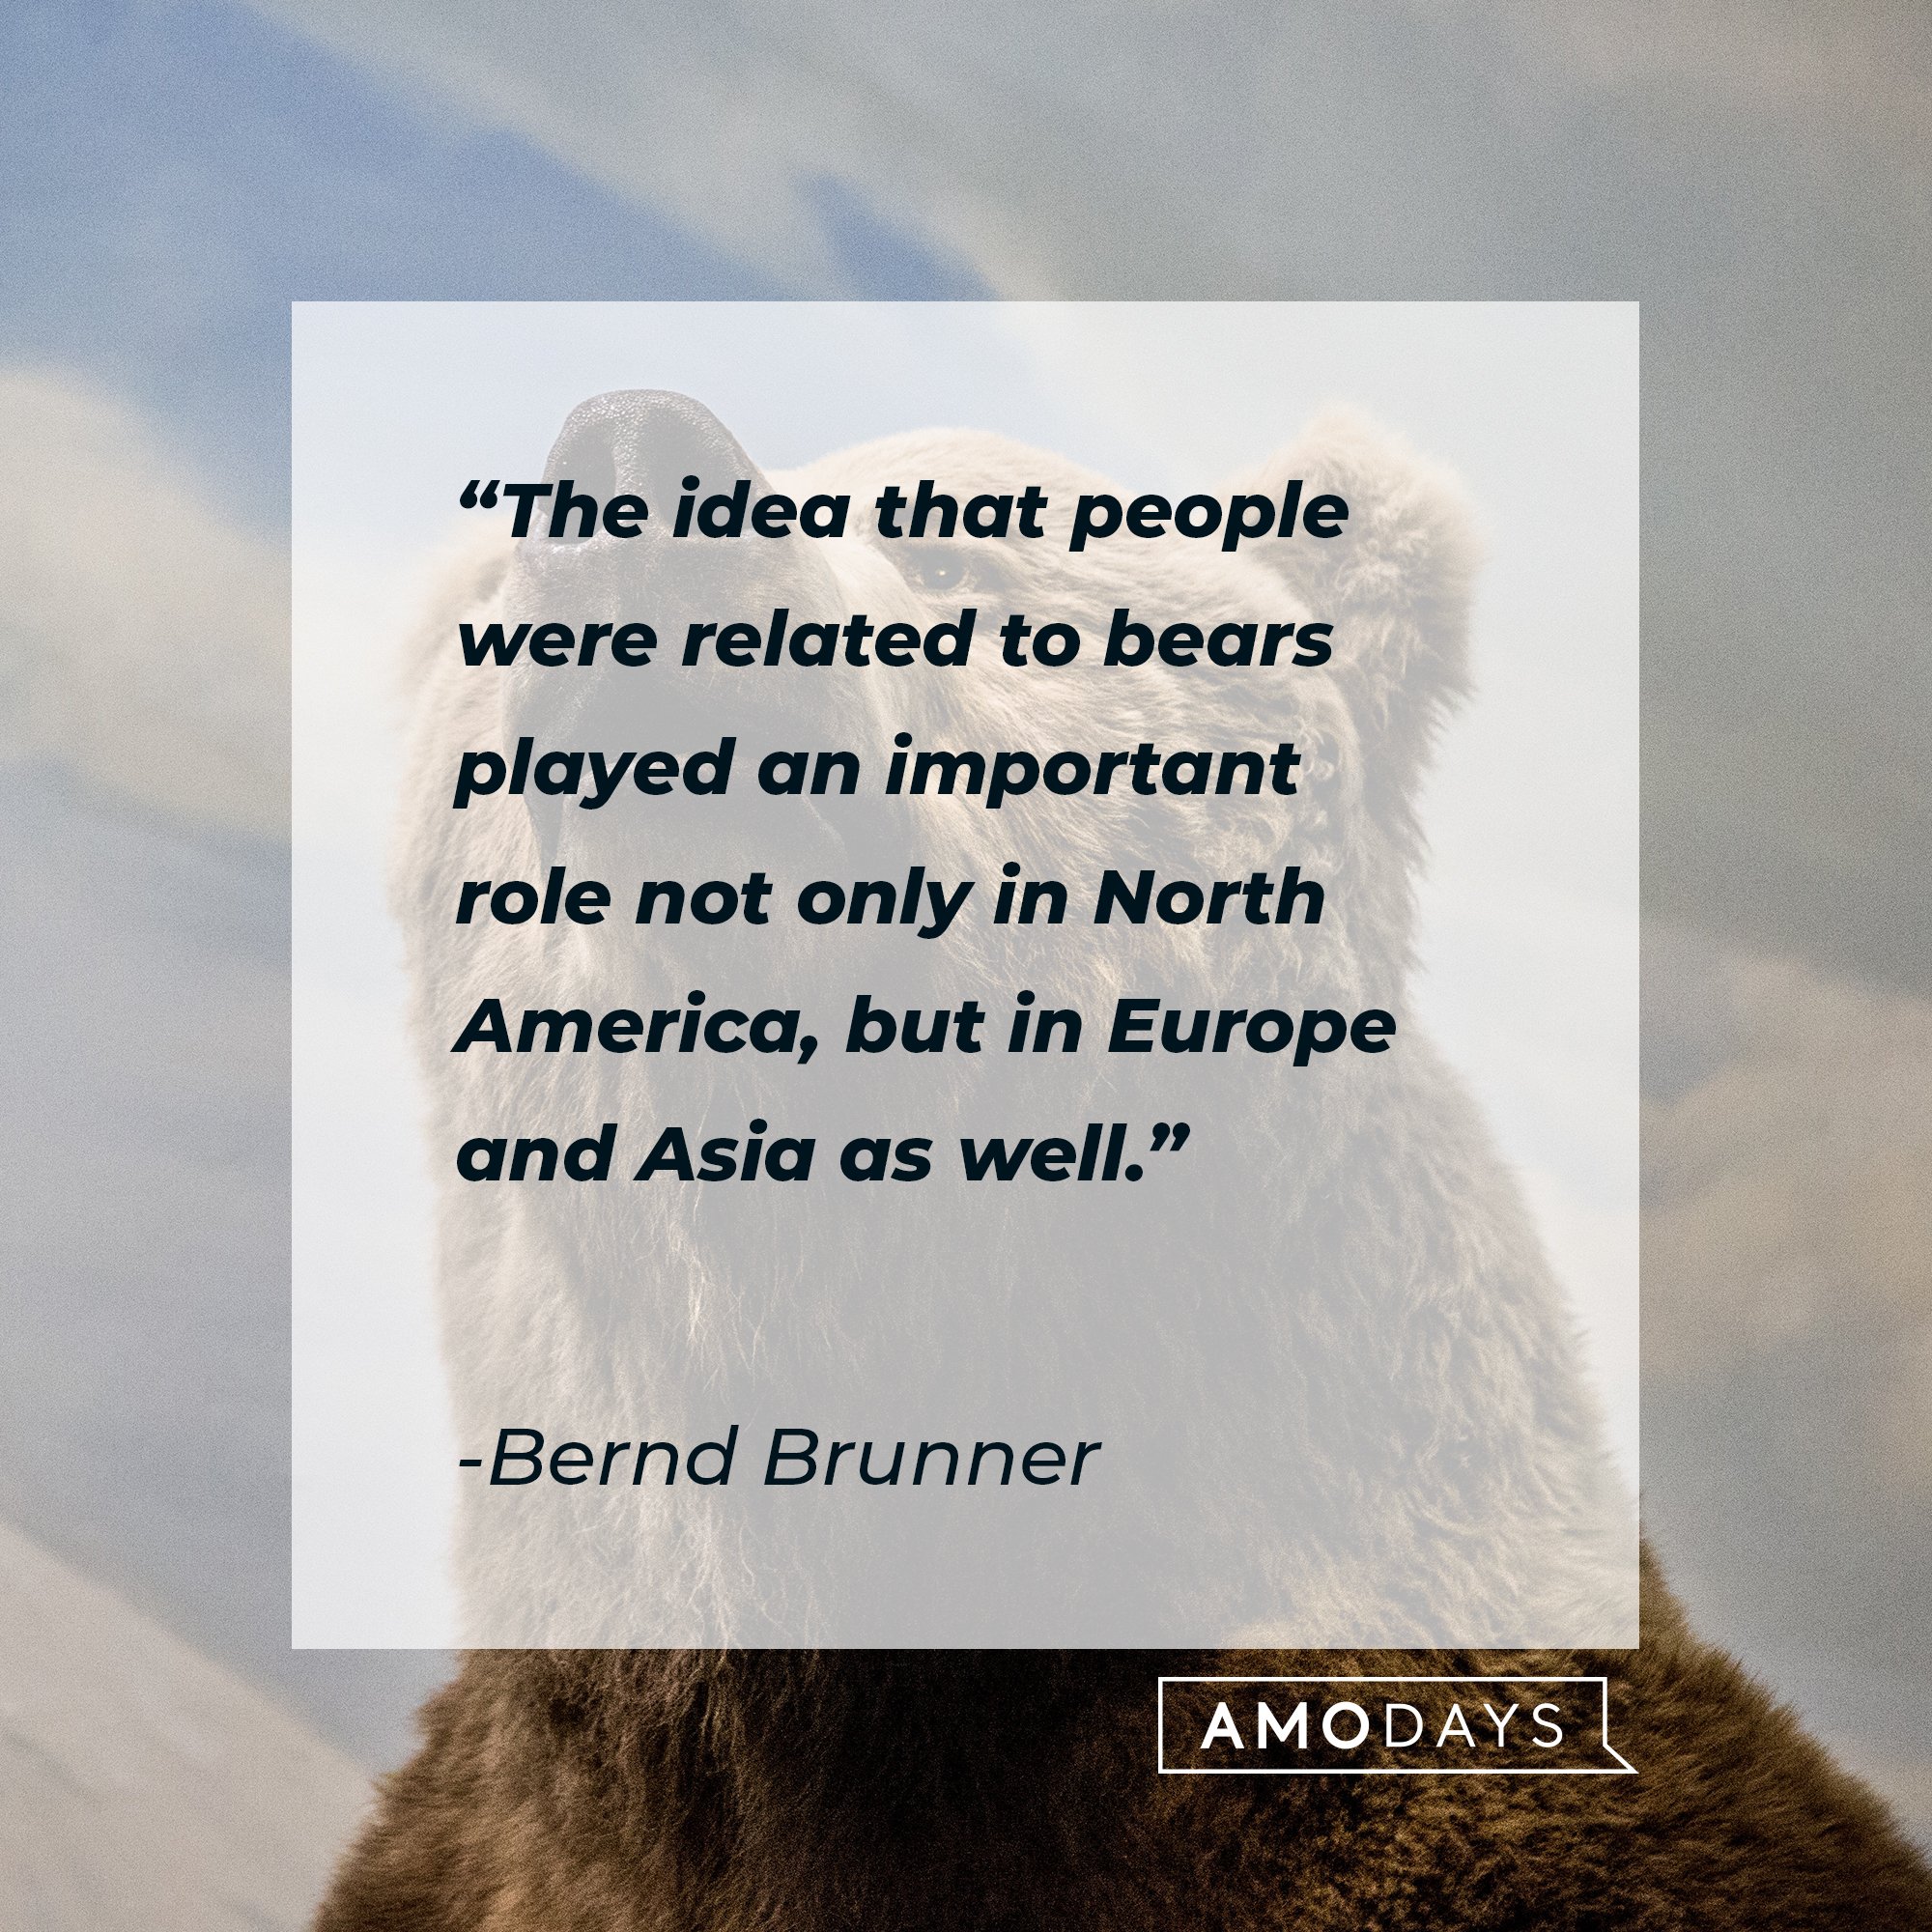 Bernd Brunner’s quote: "The idea that people were related to bears played an important role not only in North America but in Europe and Asia as well." | Image: AmoDays